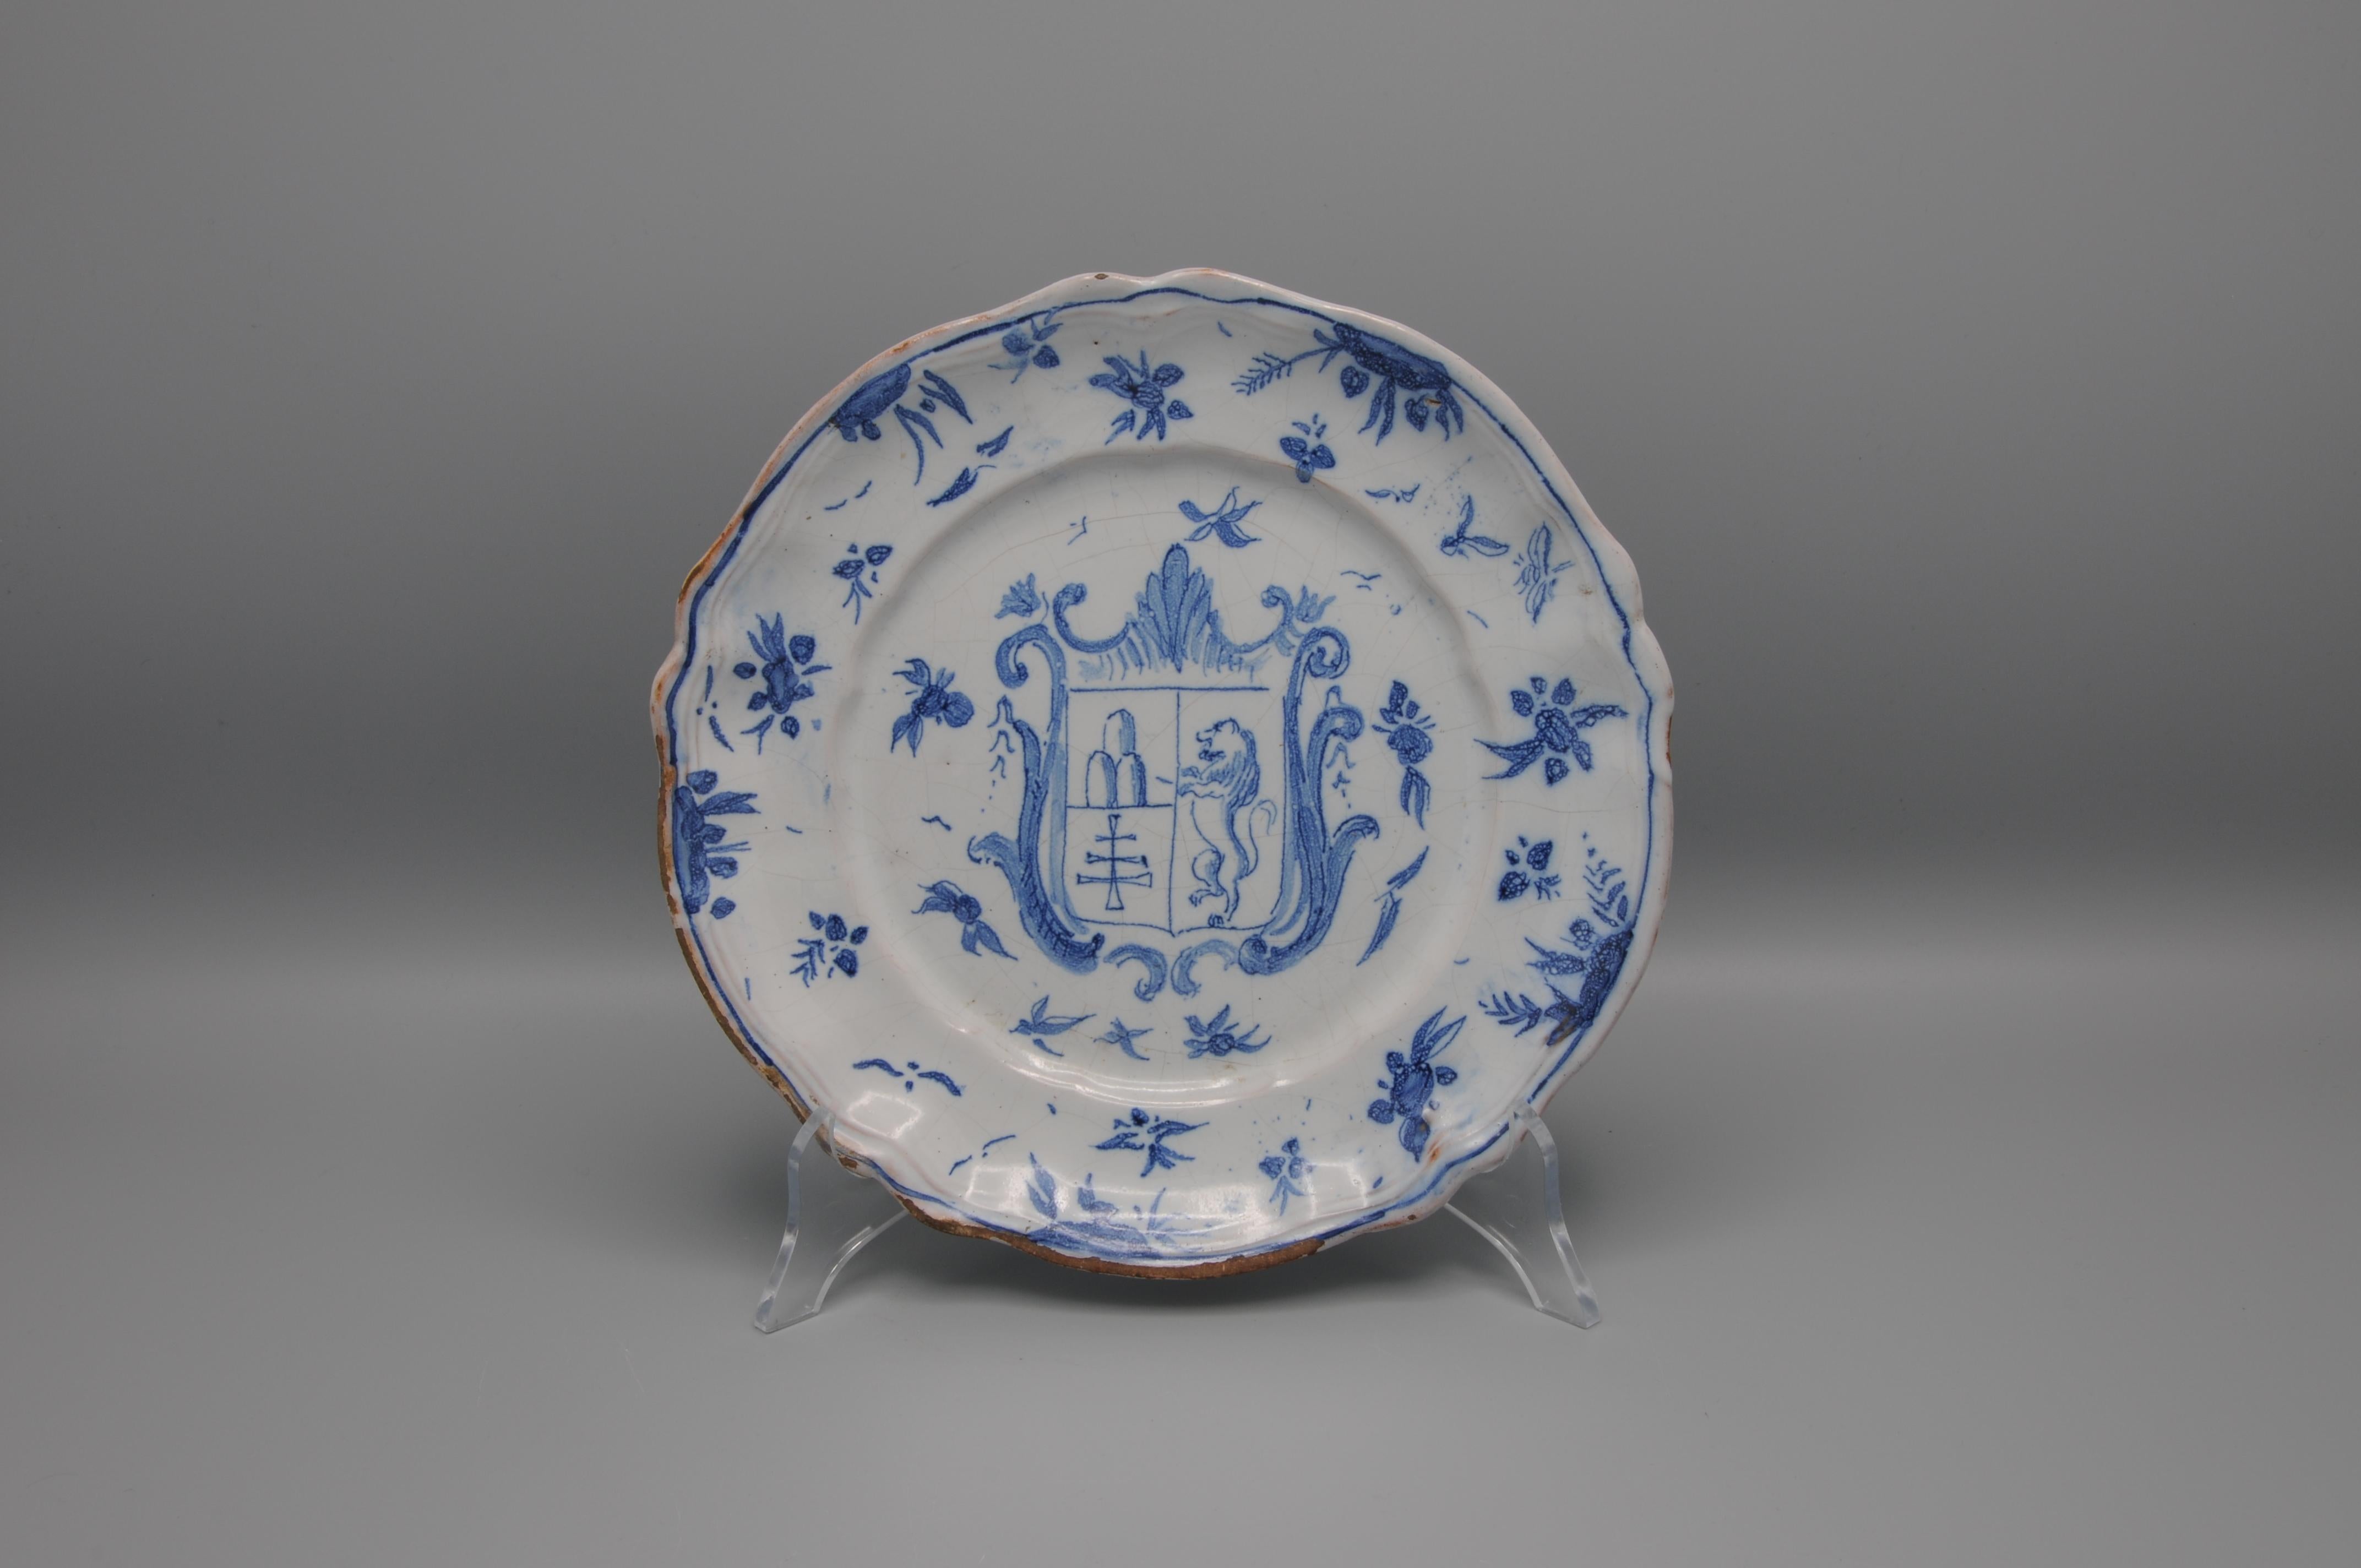 A Savona plate with blue decor. On the front a heraldic coat of arms - divided into two, on the right three mountains and a pontifical cross, on the left a climbing lion- within border with motifs “orientalizzante o a tappezzeria”.

 